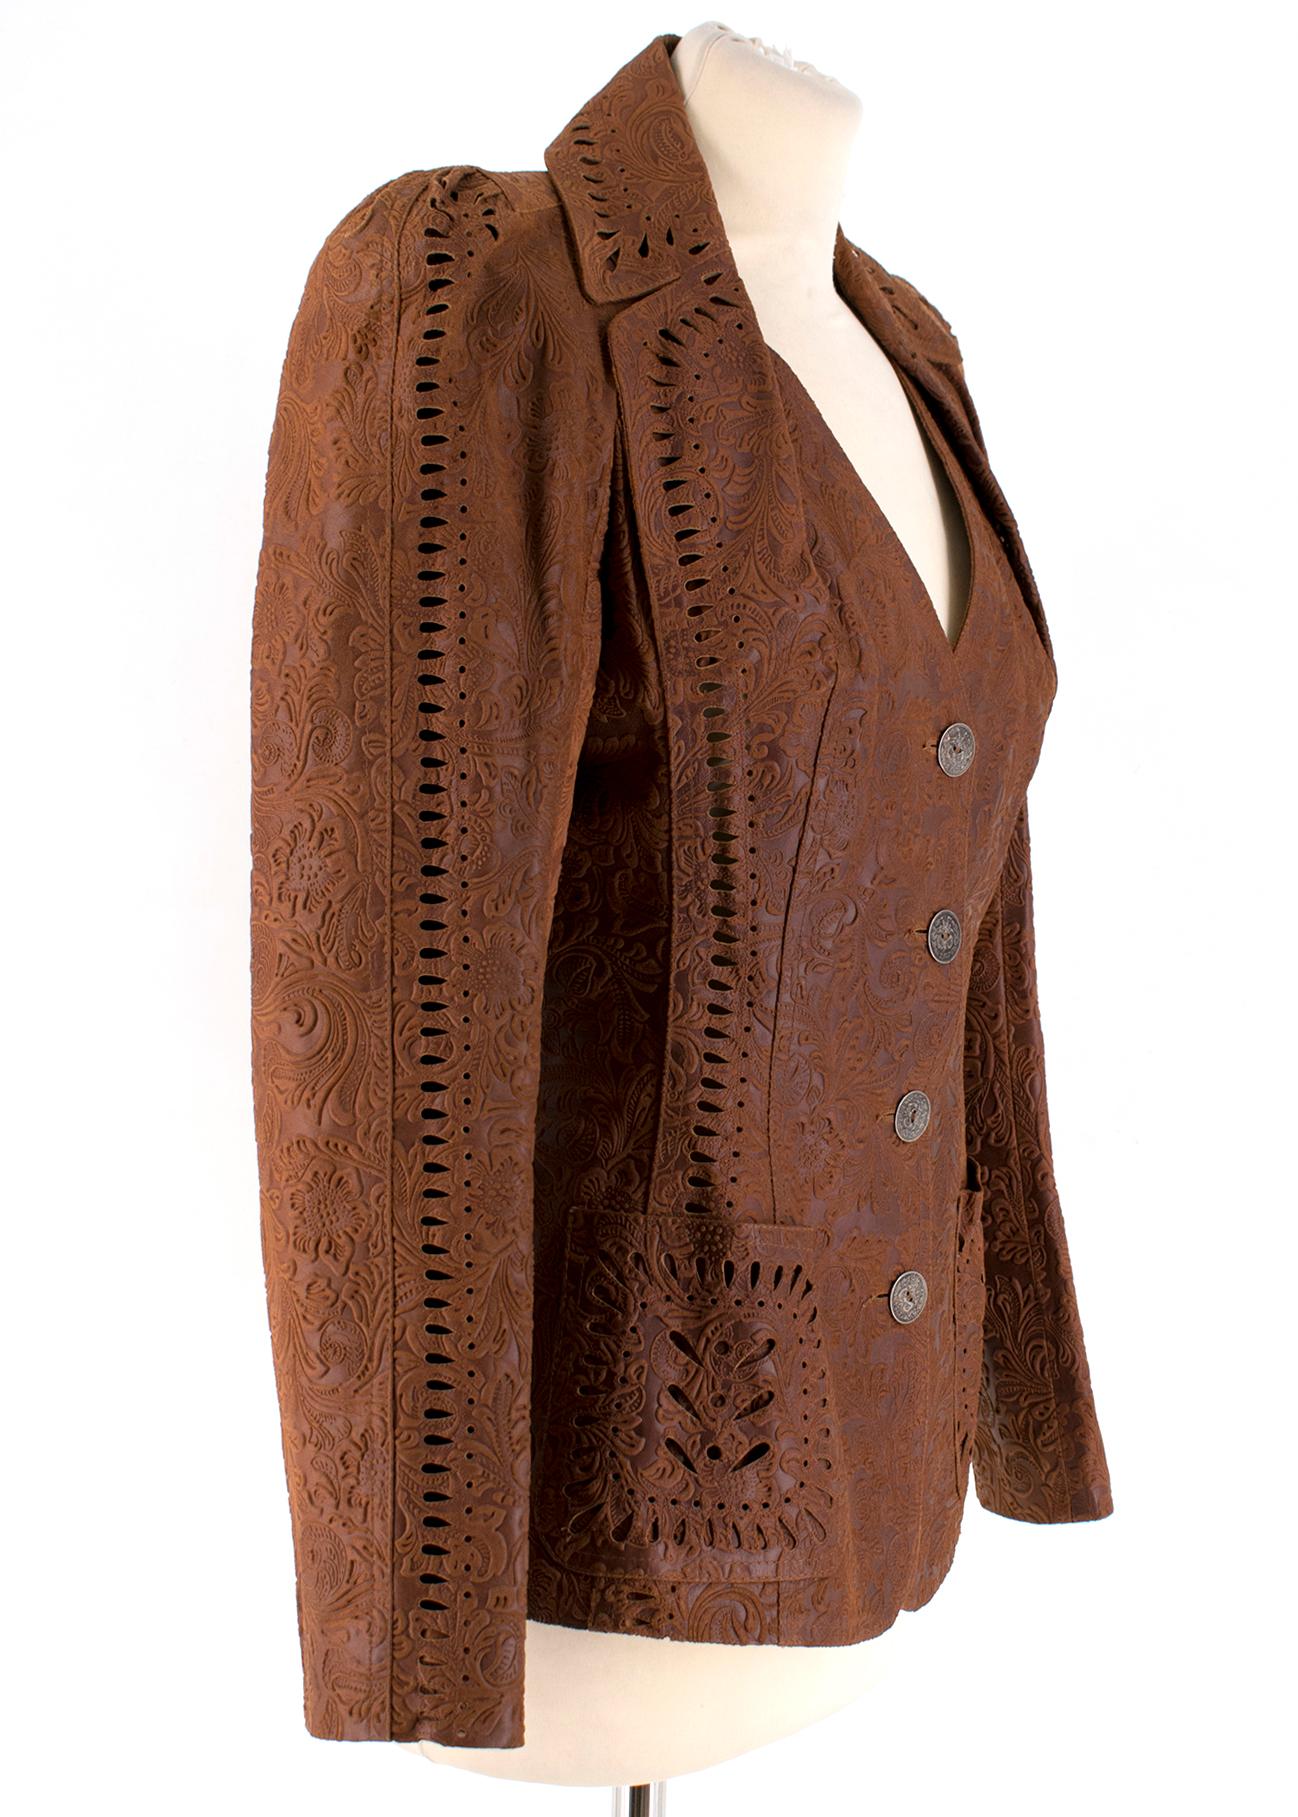 Christian Dior Vintage Brown Laser Cut Pig Skin Suit with padded shoulders, eyelet detailing, and a lovely paisley pattern. Jacket and trousers features quality vintage buttons giving a chic modern look. 2 piece set, available trousers to